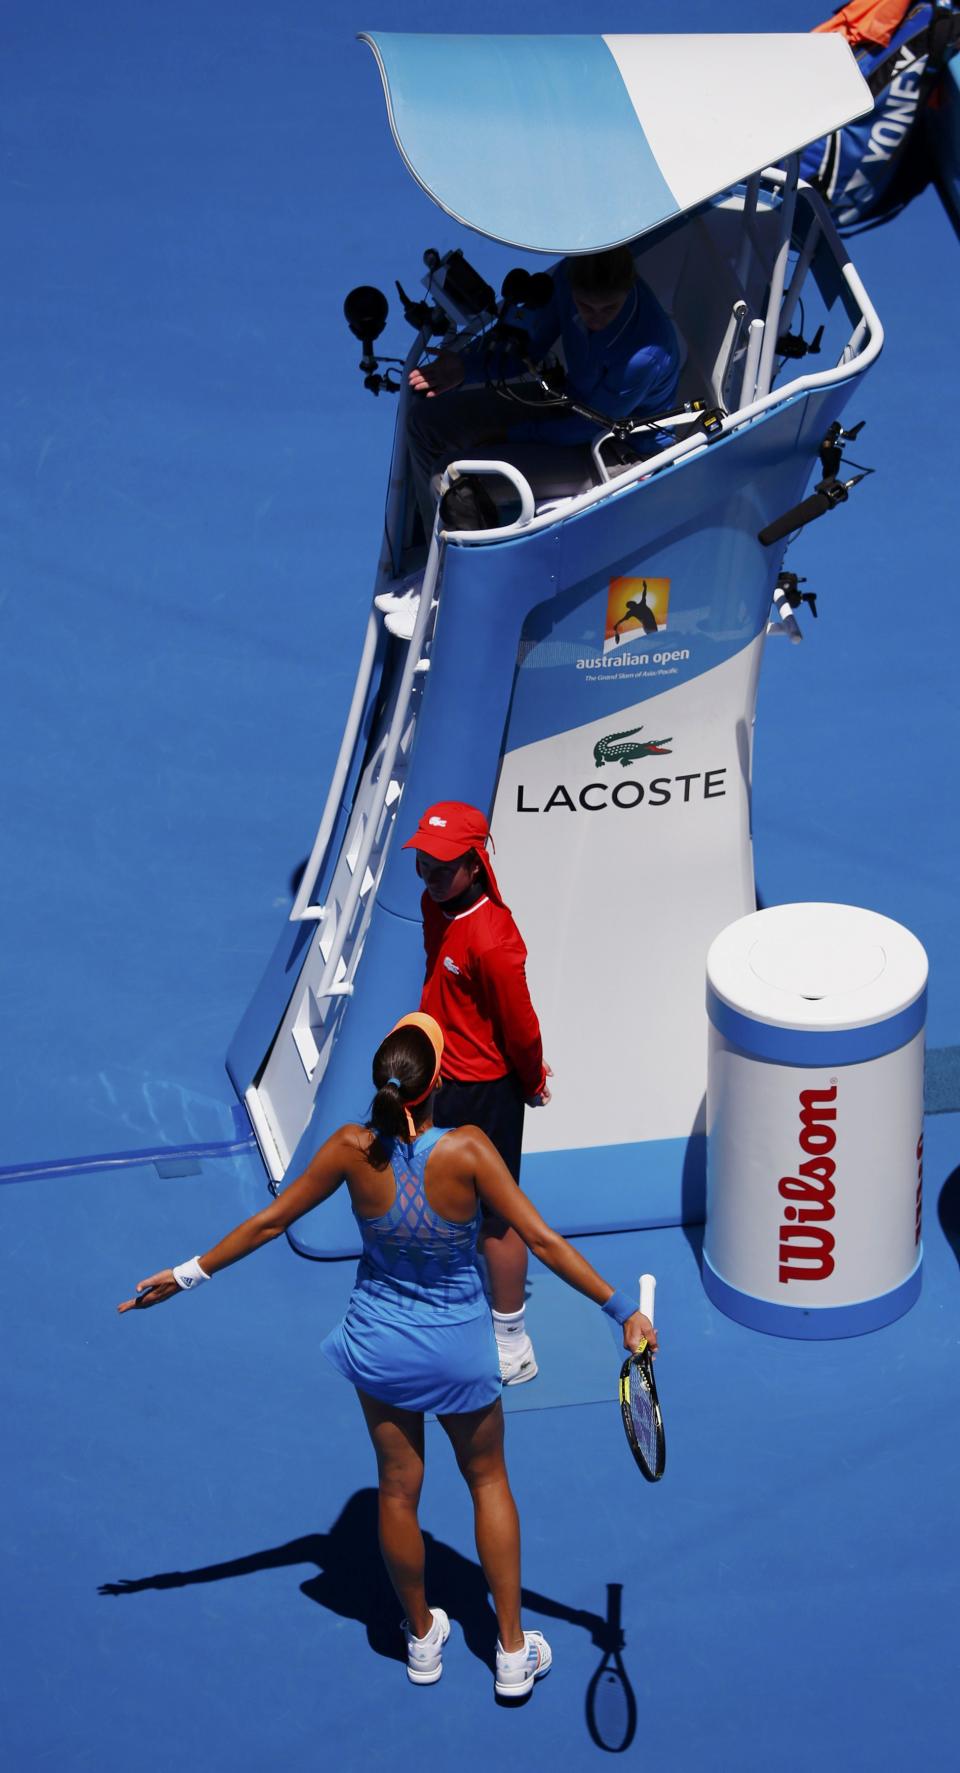 Ana Ivanovic of Serbia argues a call with chair umpire Mariana Alves (top) of Portugal during her women's singles quarter-final match against Eugenie Bouchard of Canada at the Australian Open 2014 tennis tournament in Melbourne January 21, 2014. REUTERS/David Gray (AUSTRALIA - Tags: SPORT TENNIS)